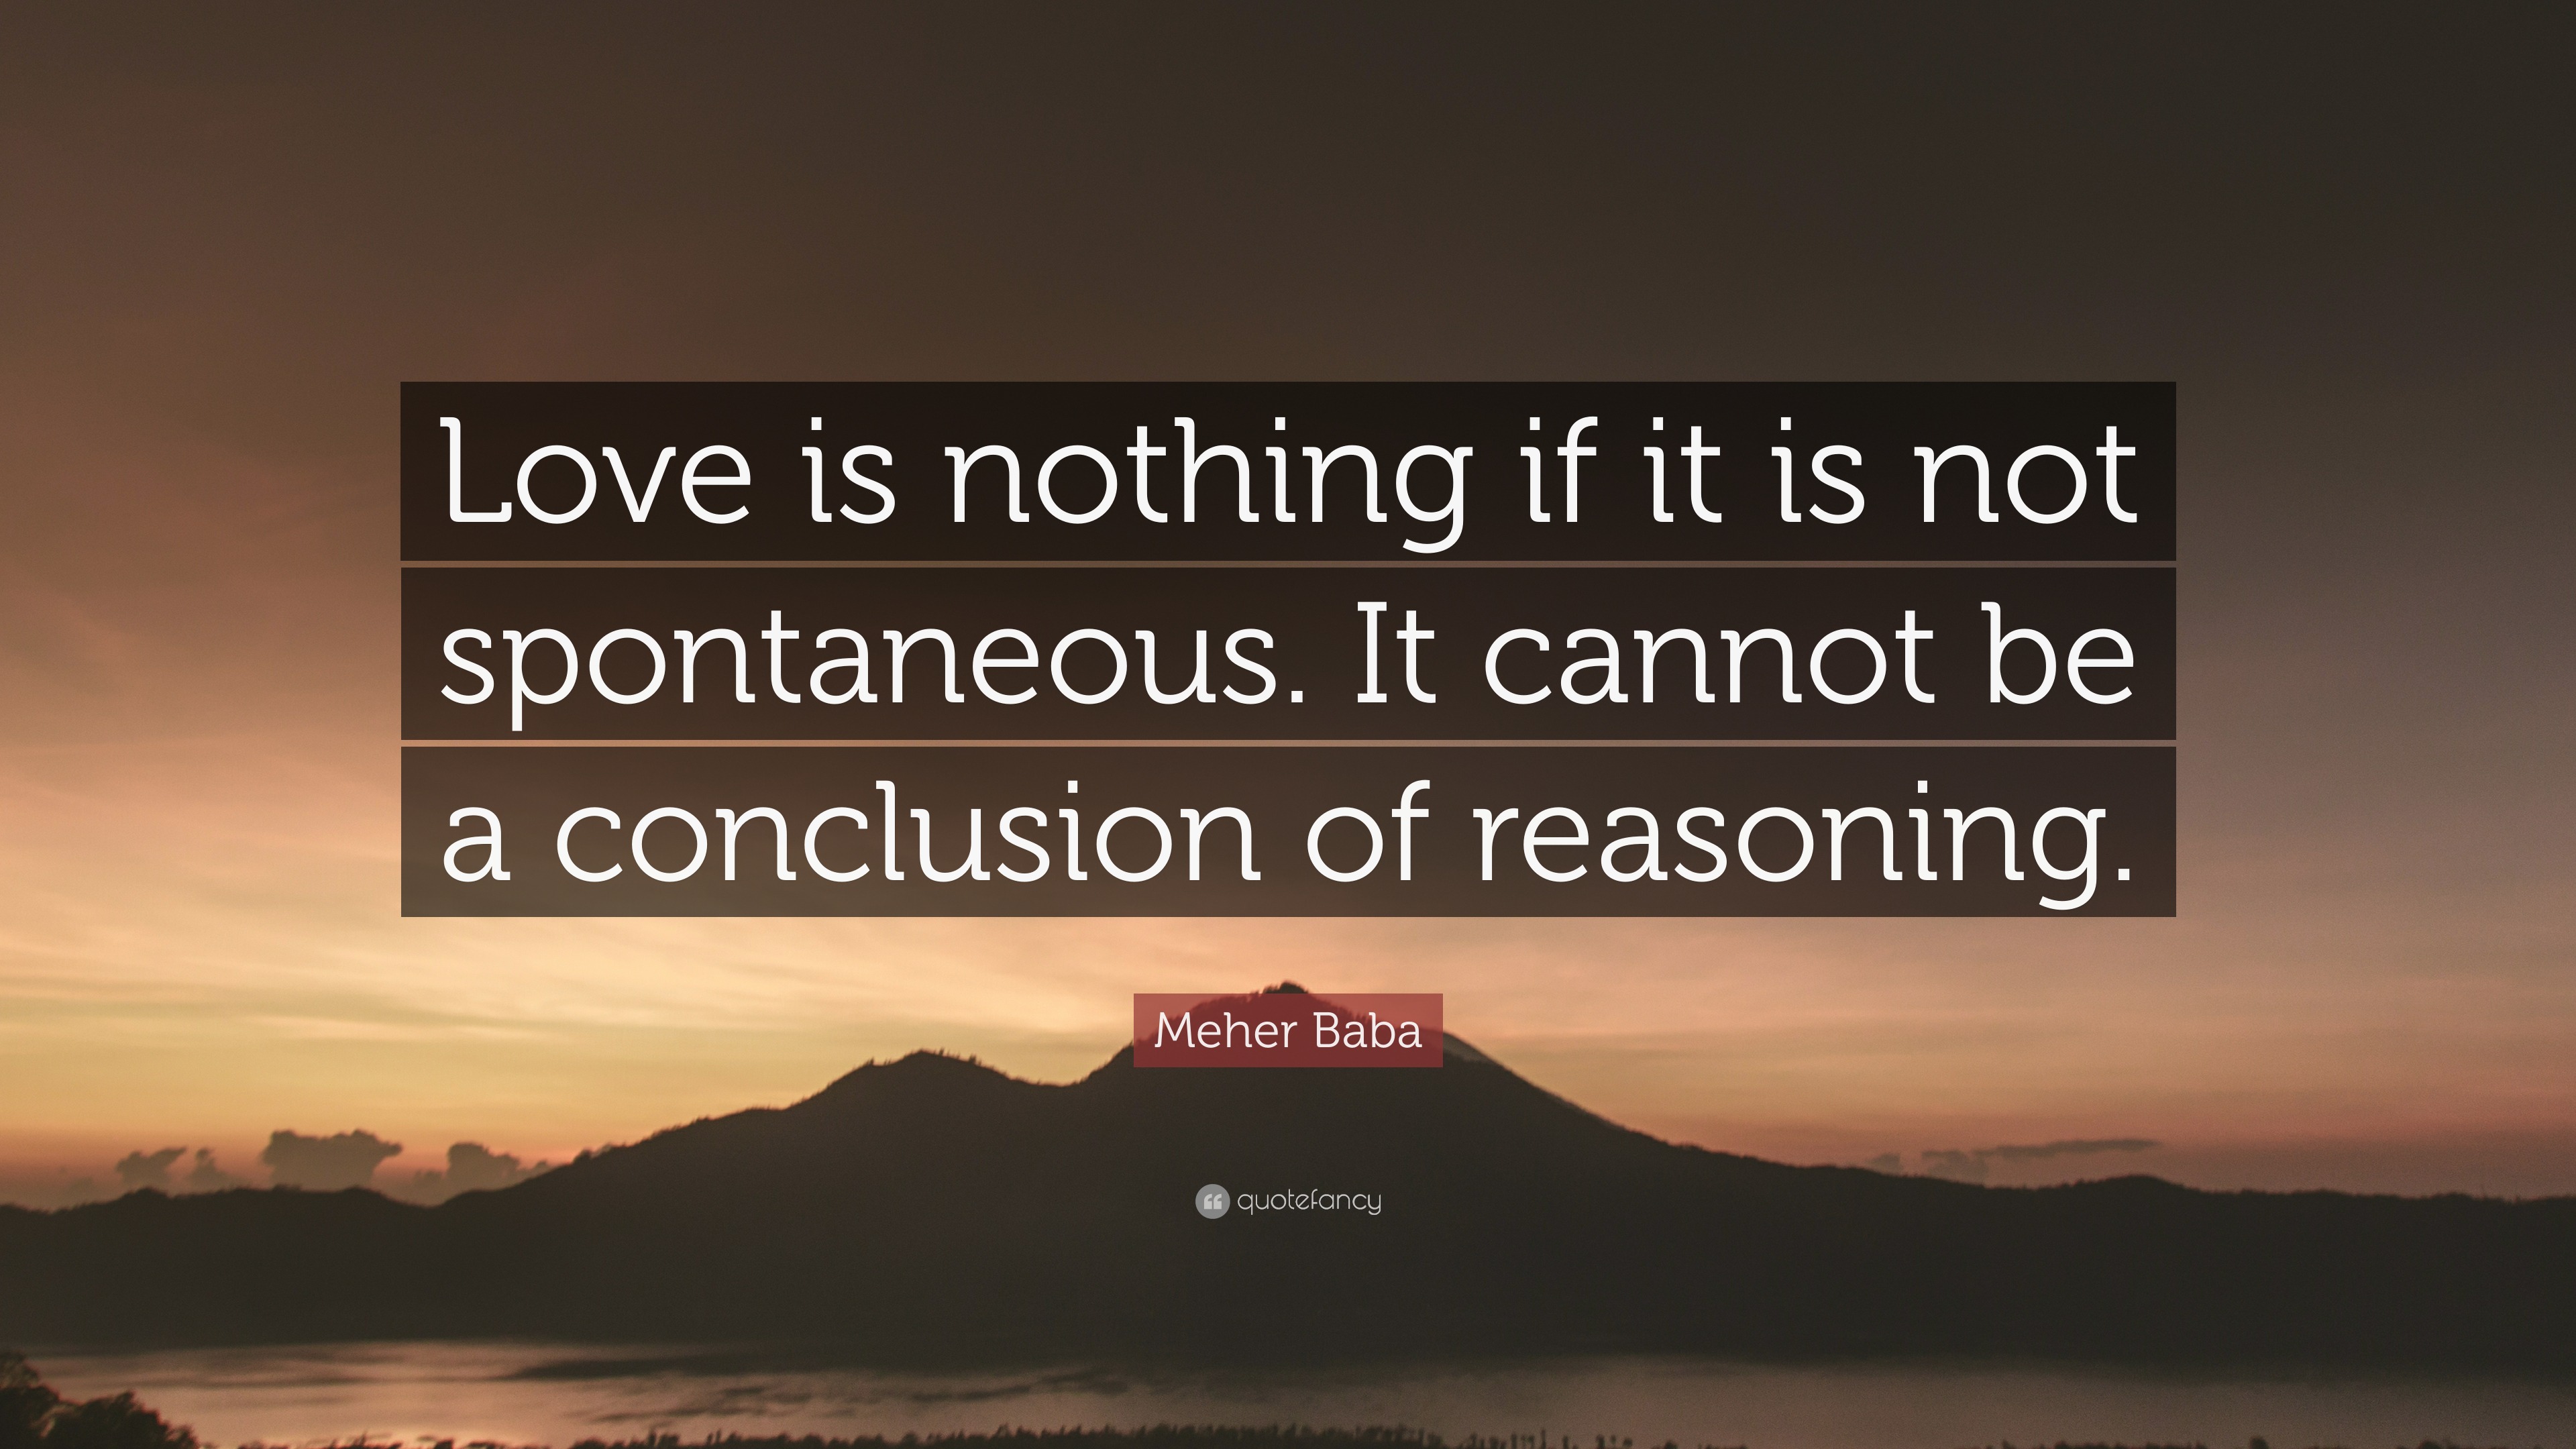 Meher Baba Quote: “Love is nothing if it is not spontaneous. It cannot ...